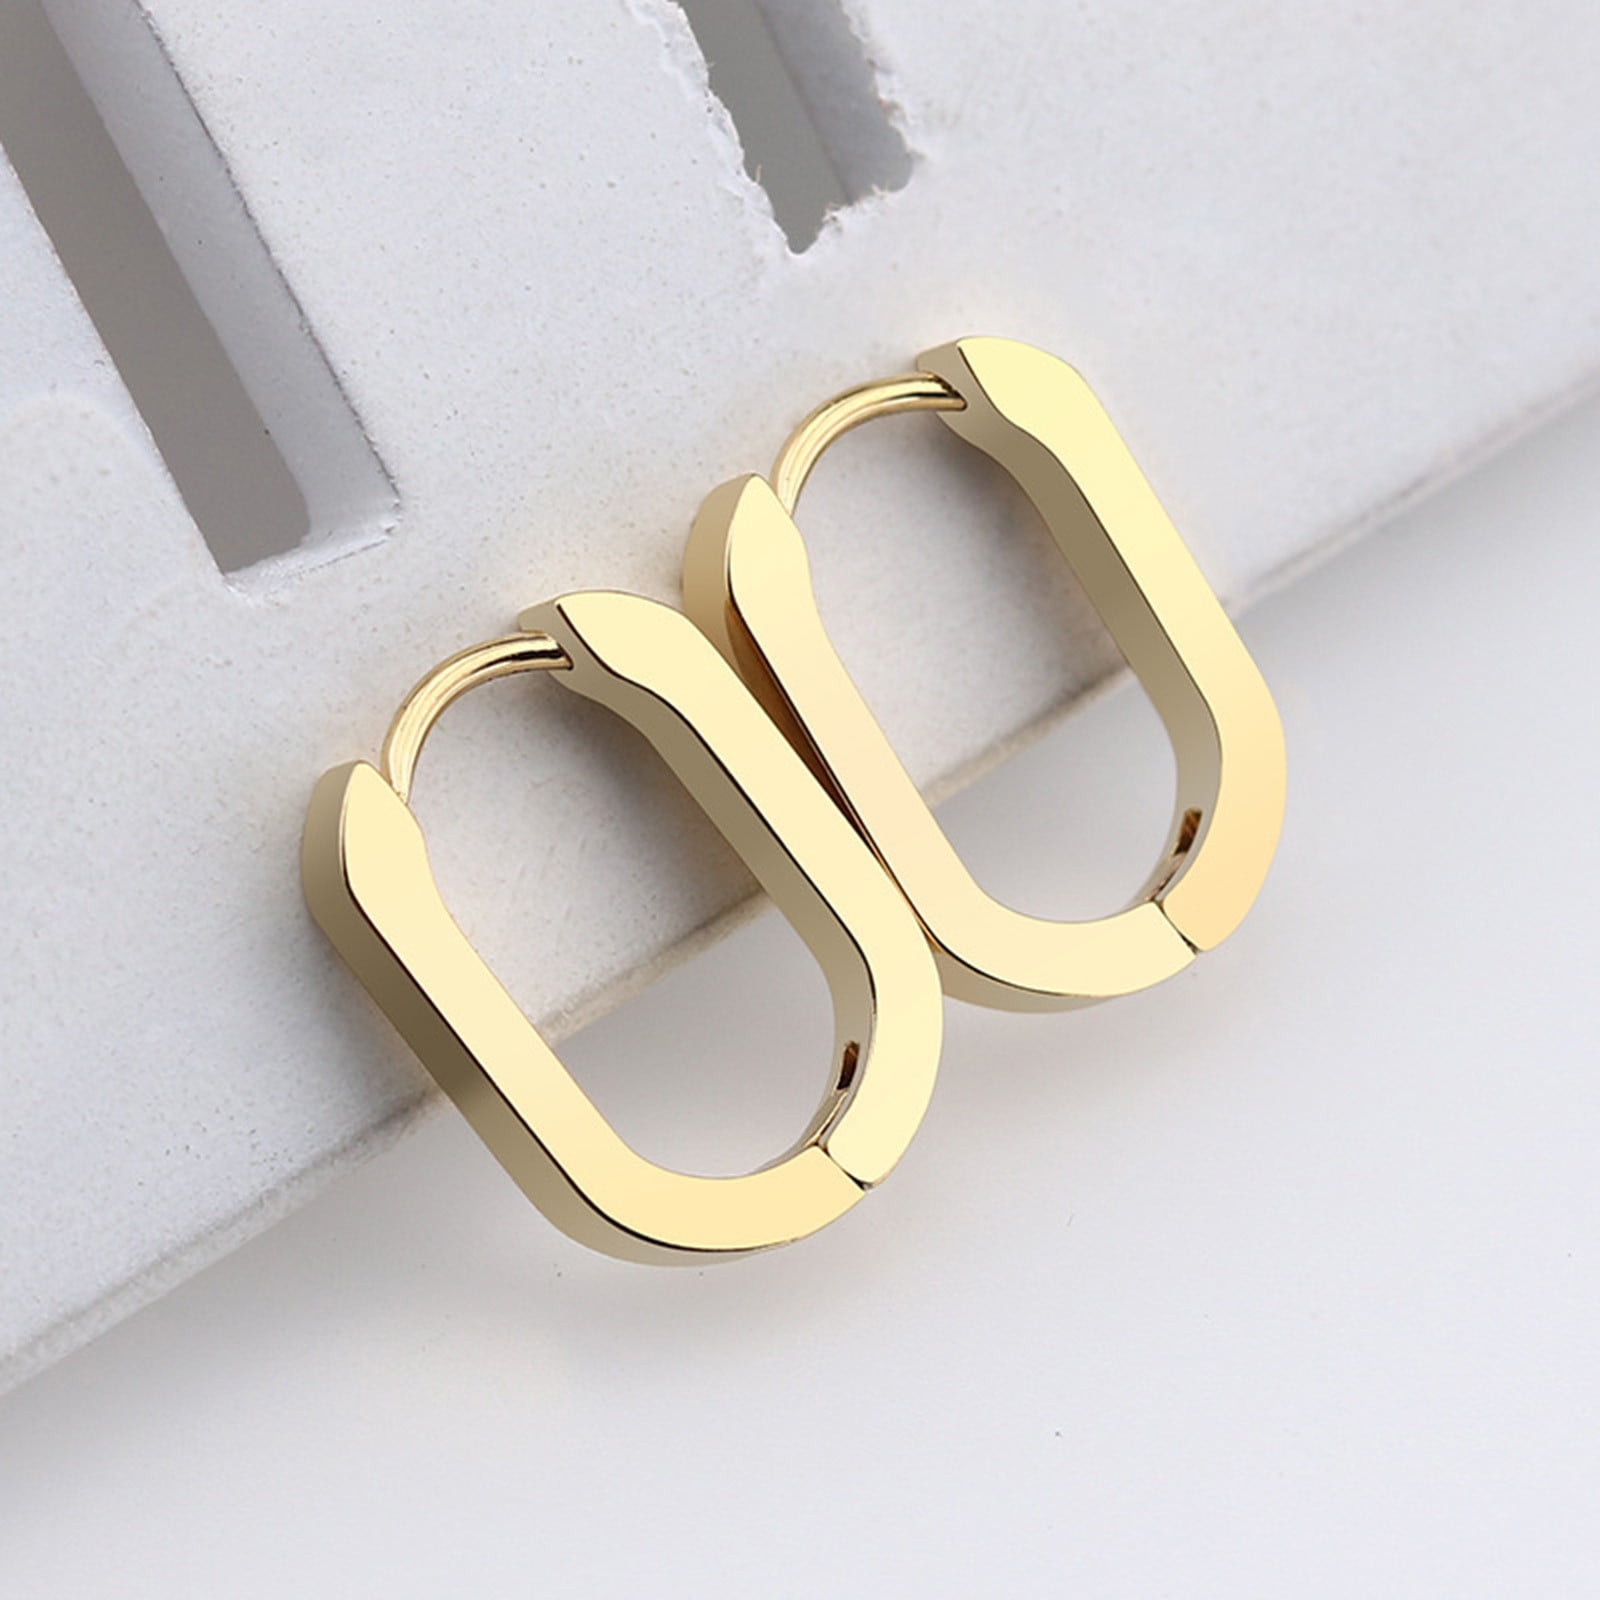 Wholesale Lots 32pcs Gold Plated Jewelry Classic Stainless Steel Women Rings 